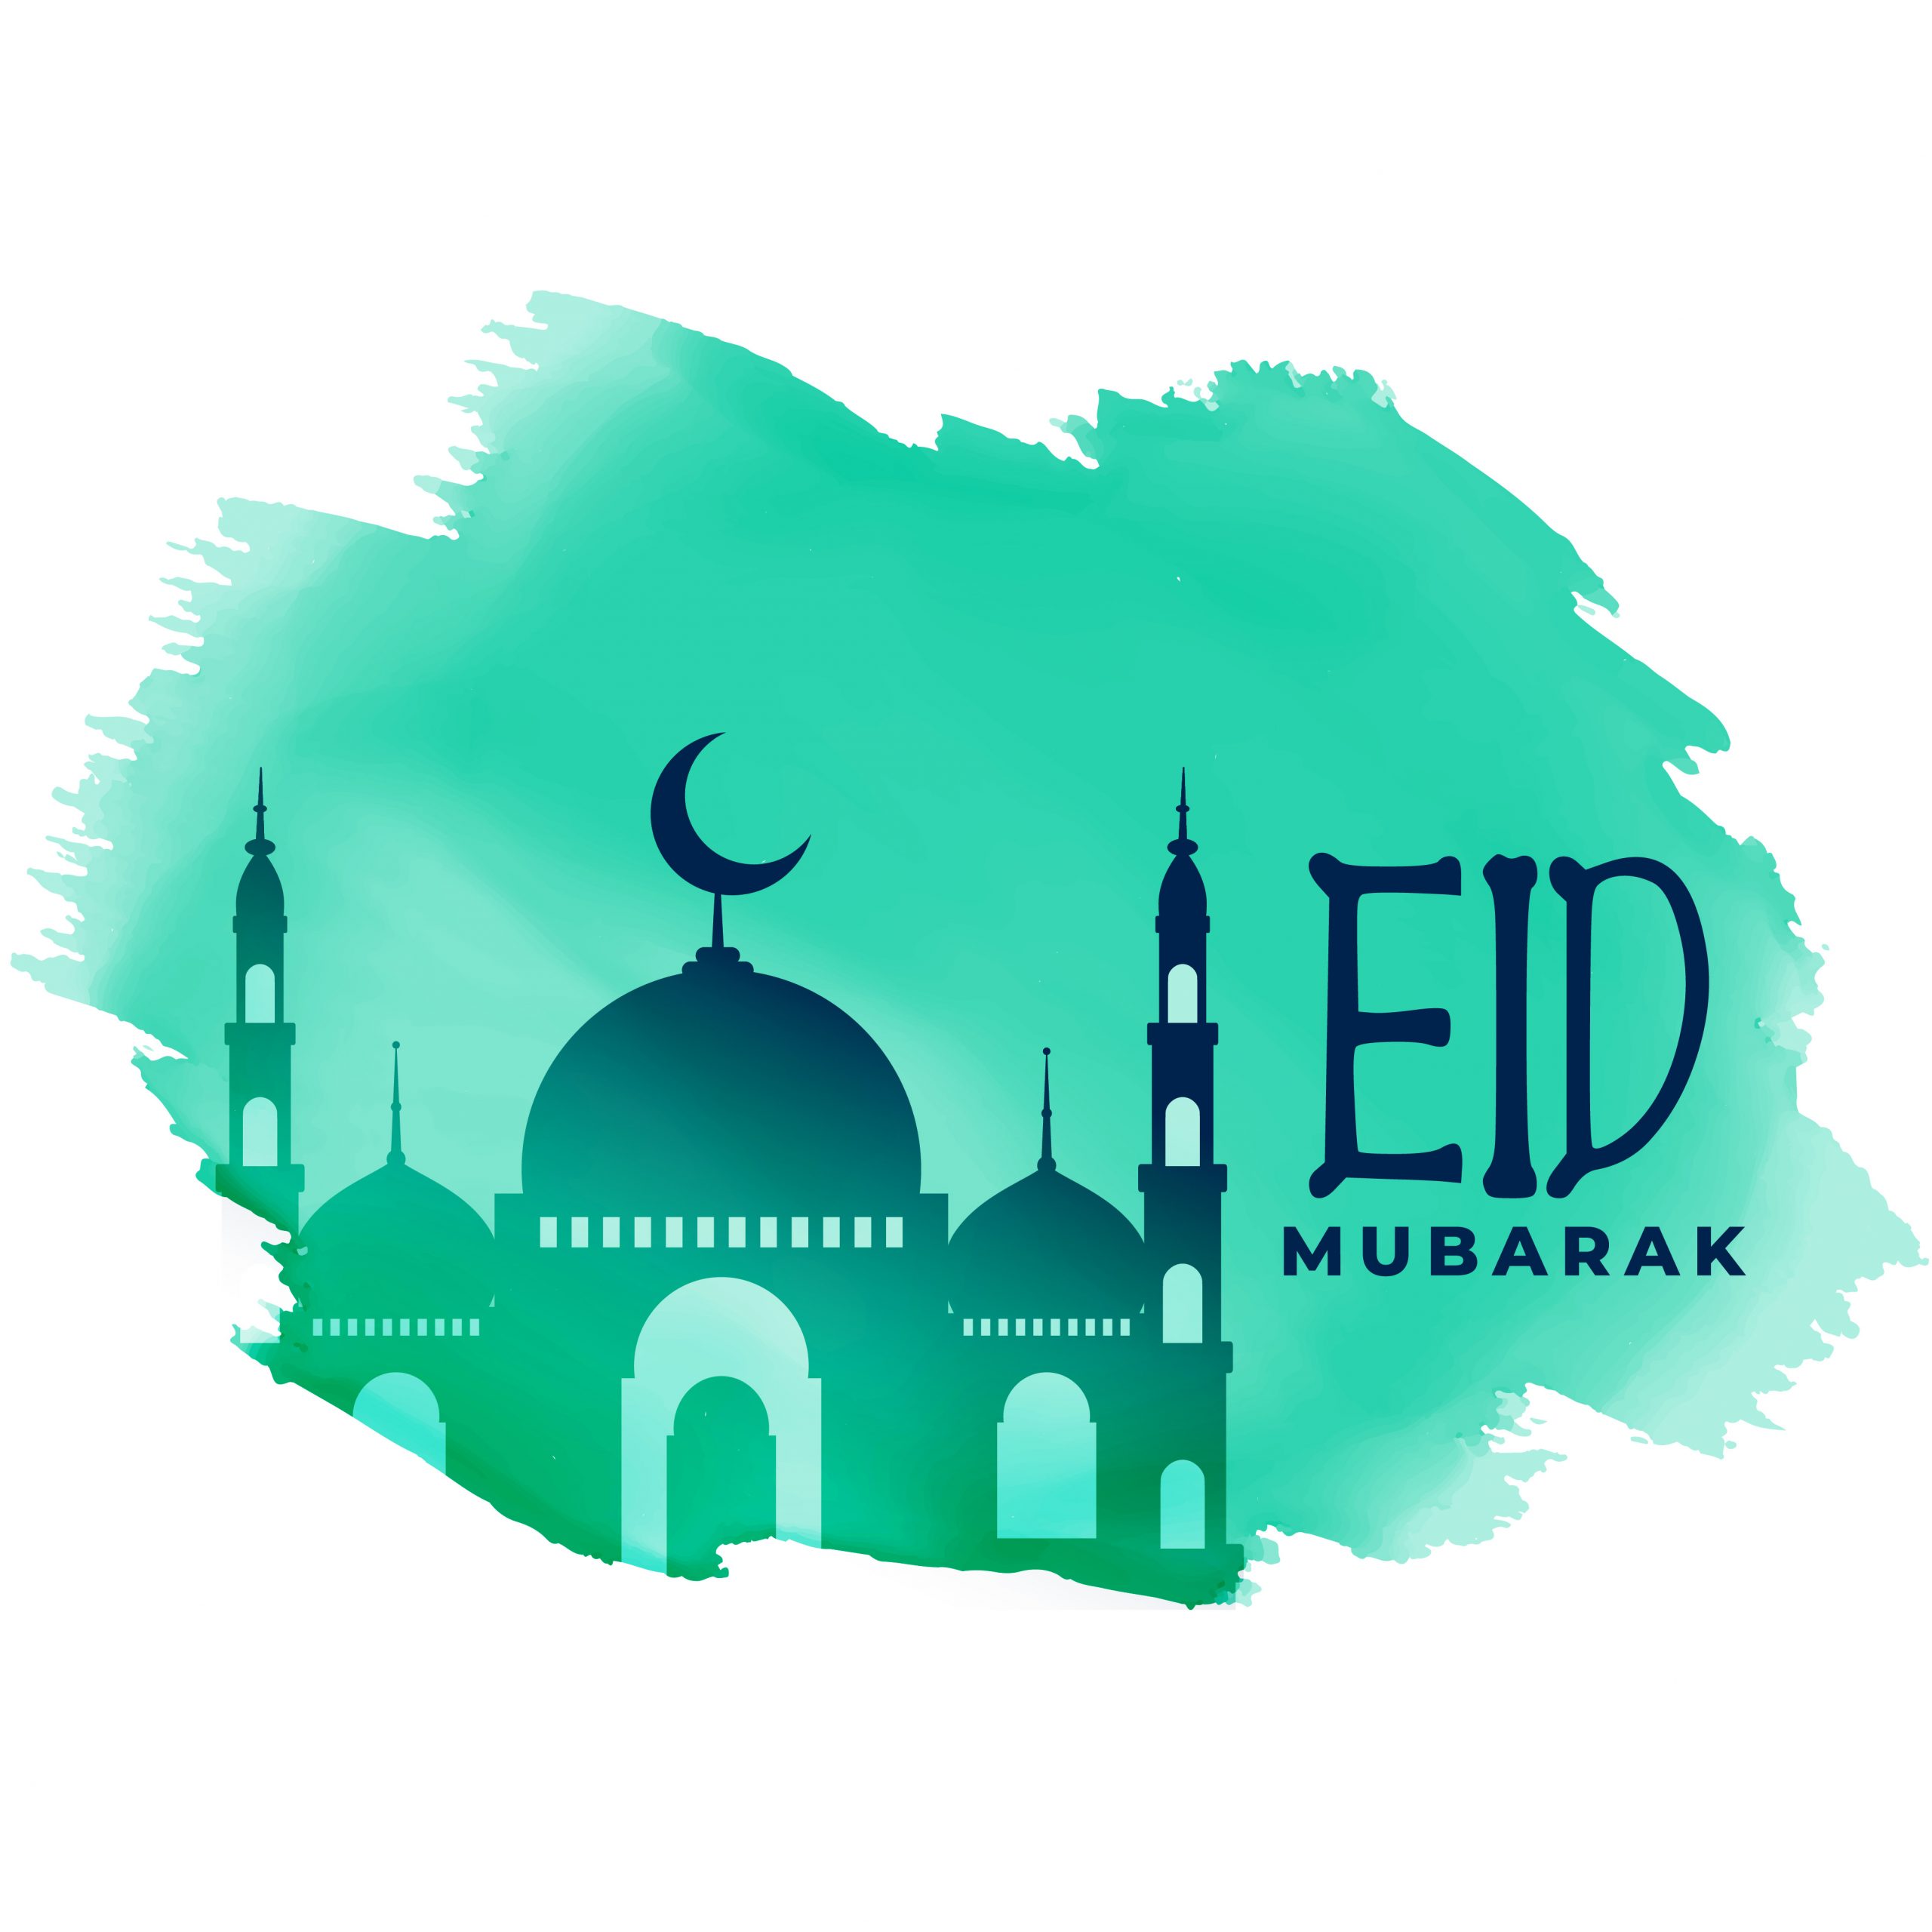 Advance Eid Greetings Pictures 2022 - Eid-ul-Fitr 2022 Pictures